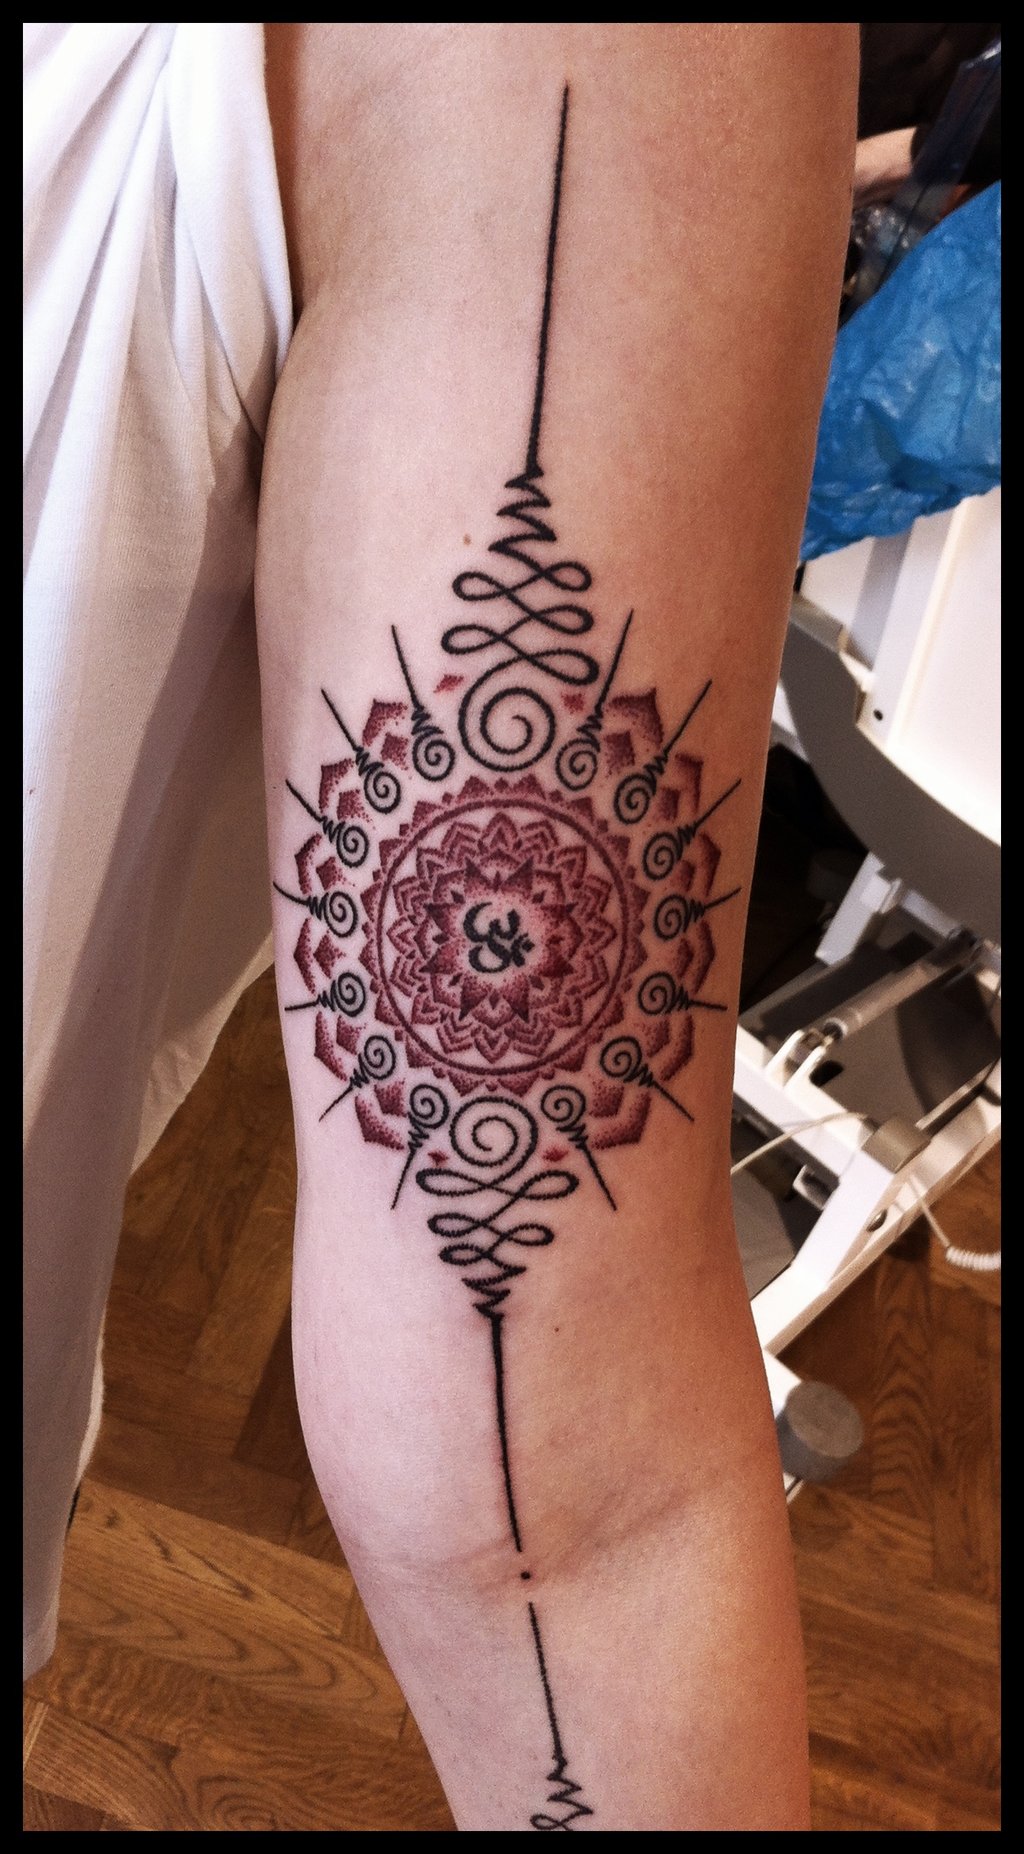 Mandala Tattoos Designs, Ideas and Meaning | Tattoos For You